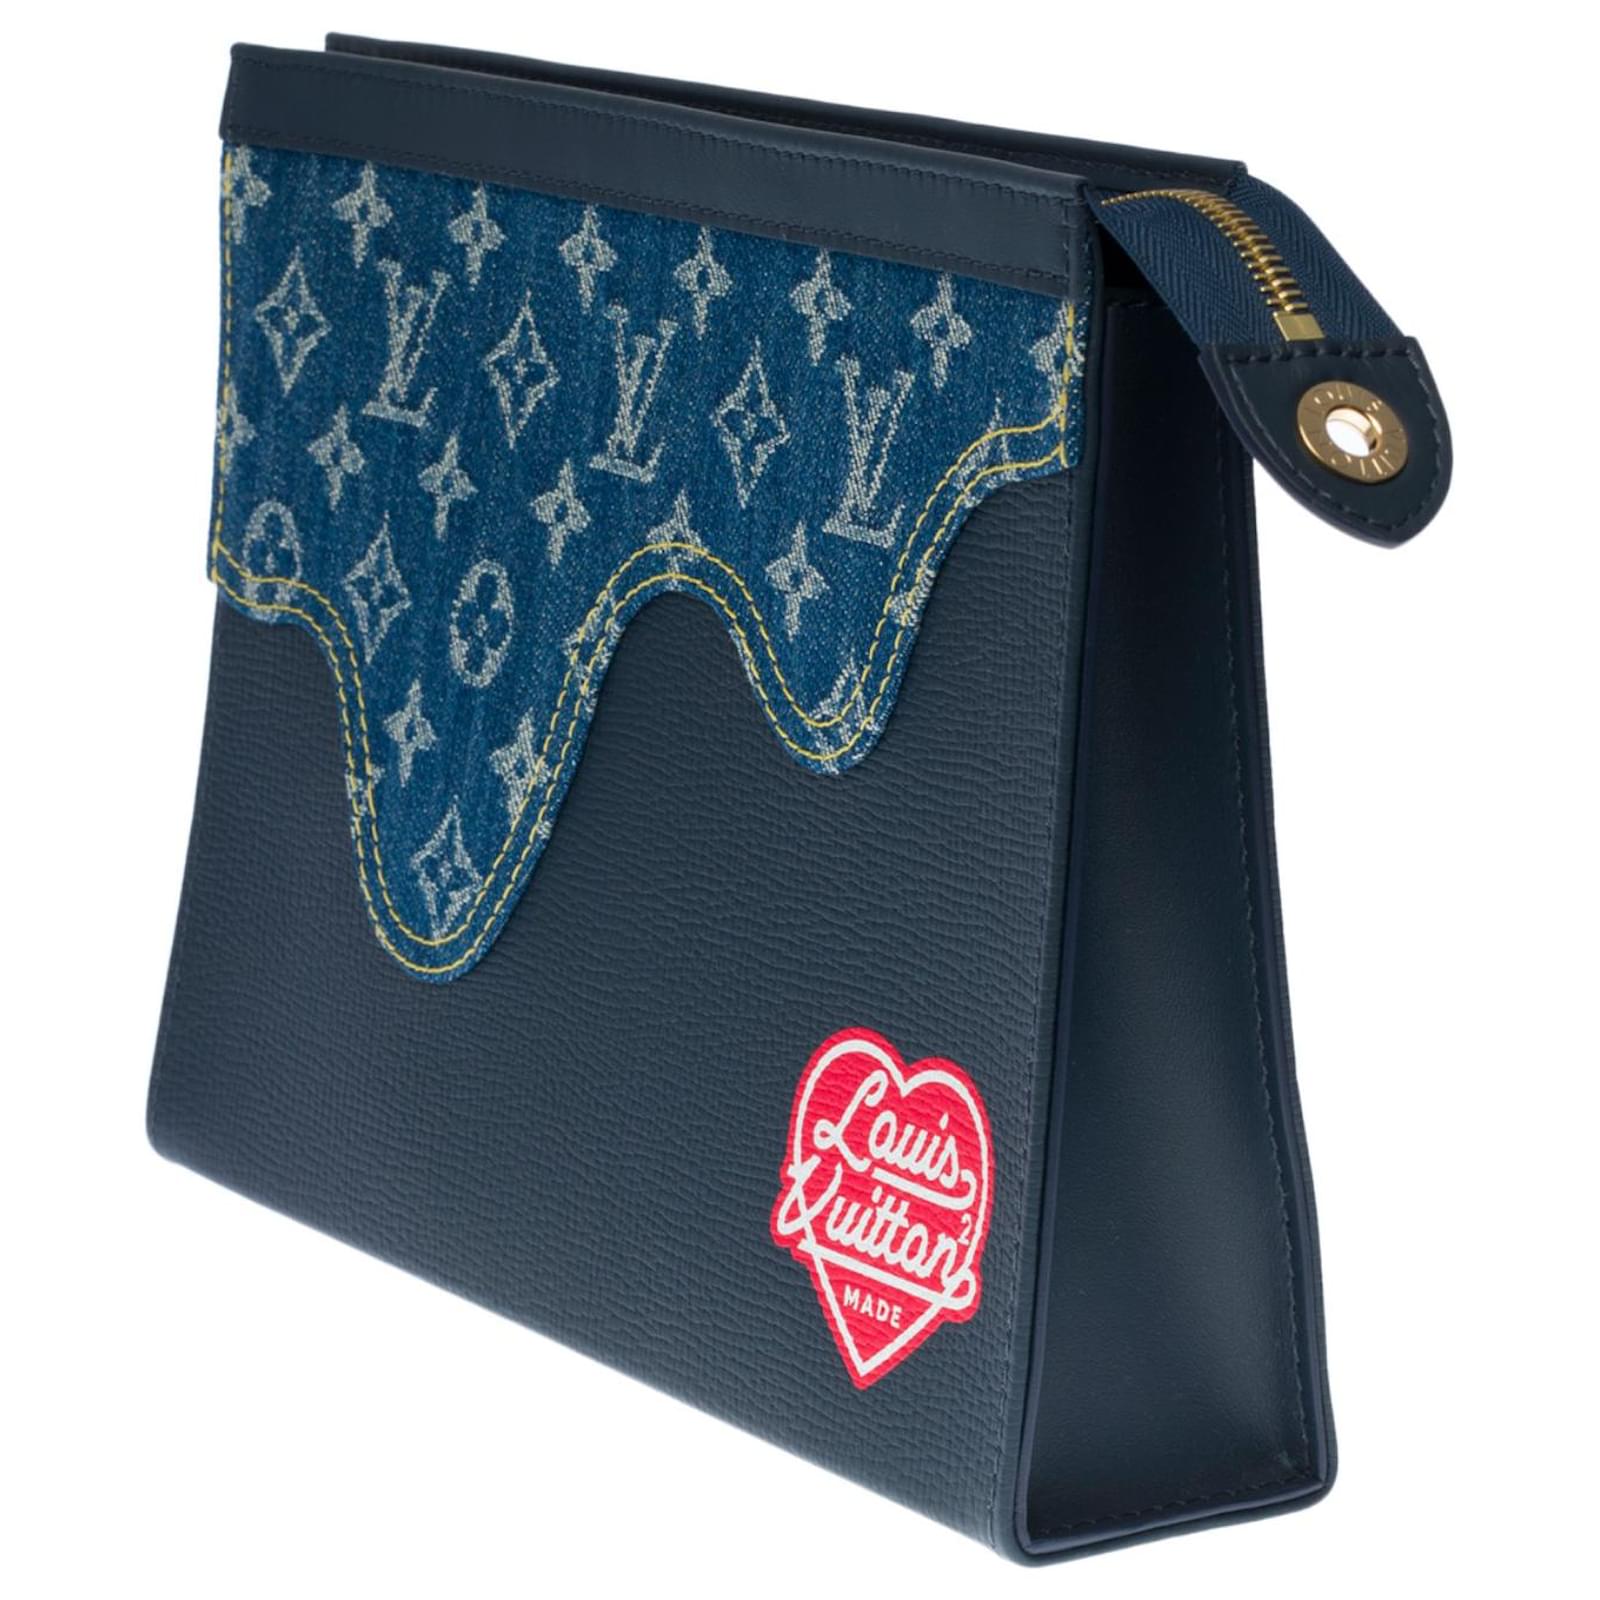 Louis Vuitton - BRAND NEW / SOLD OUT / Spring 2022 / Wallet